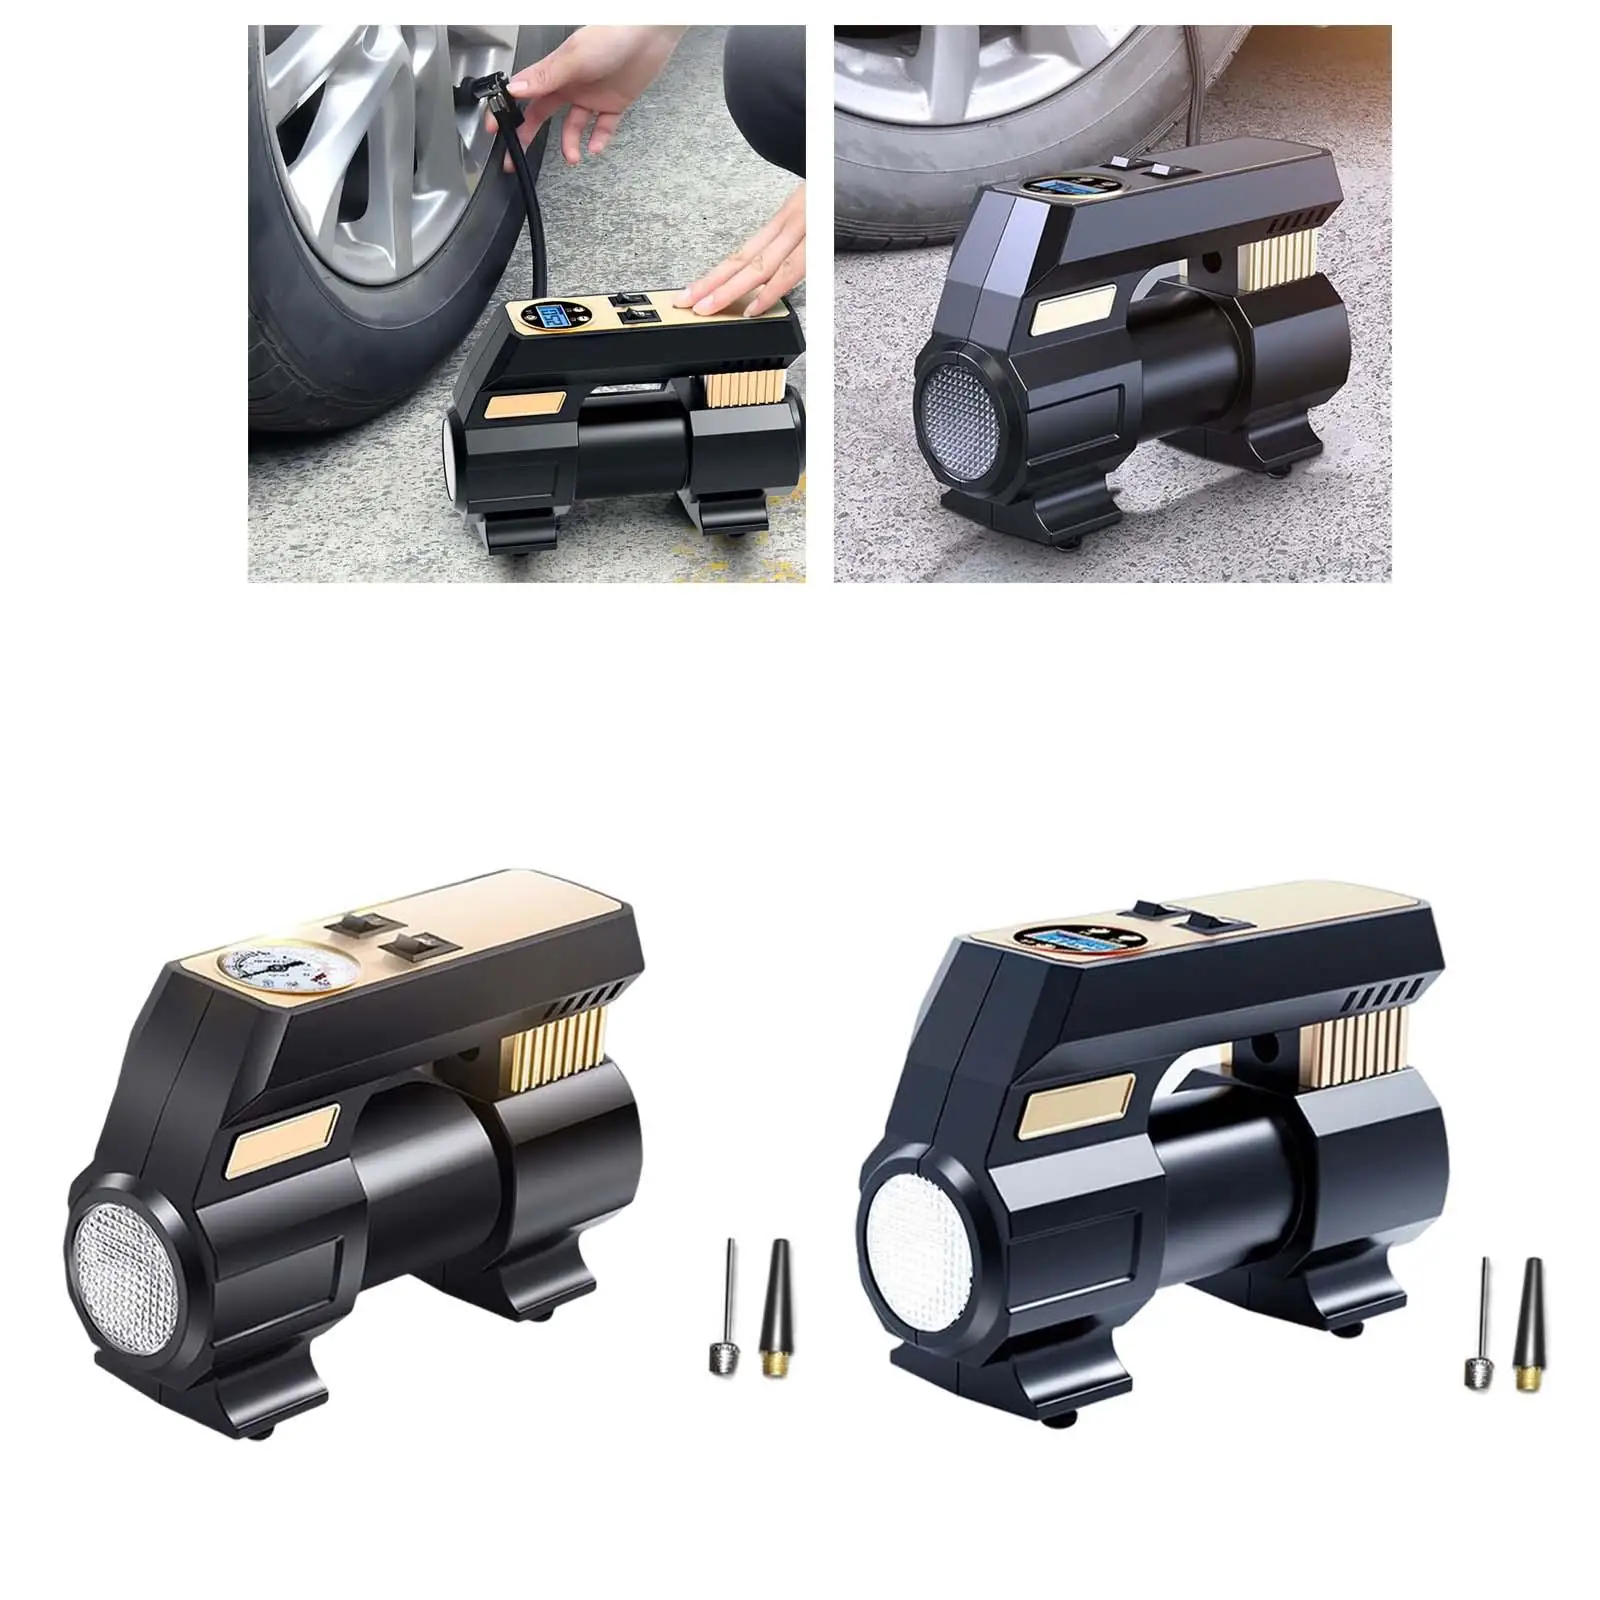 Car Air Pump 12V with Emergency   Portable for Vehicle